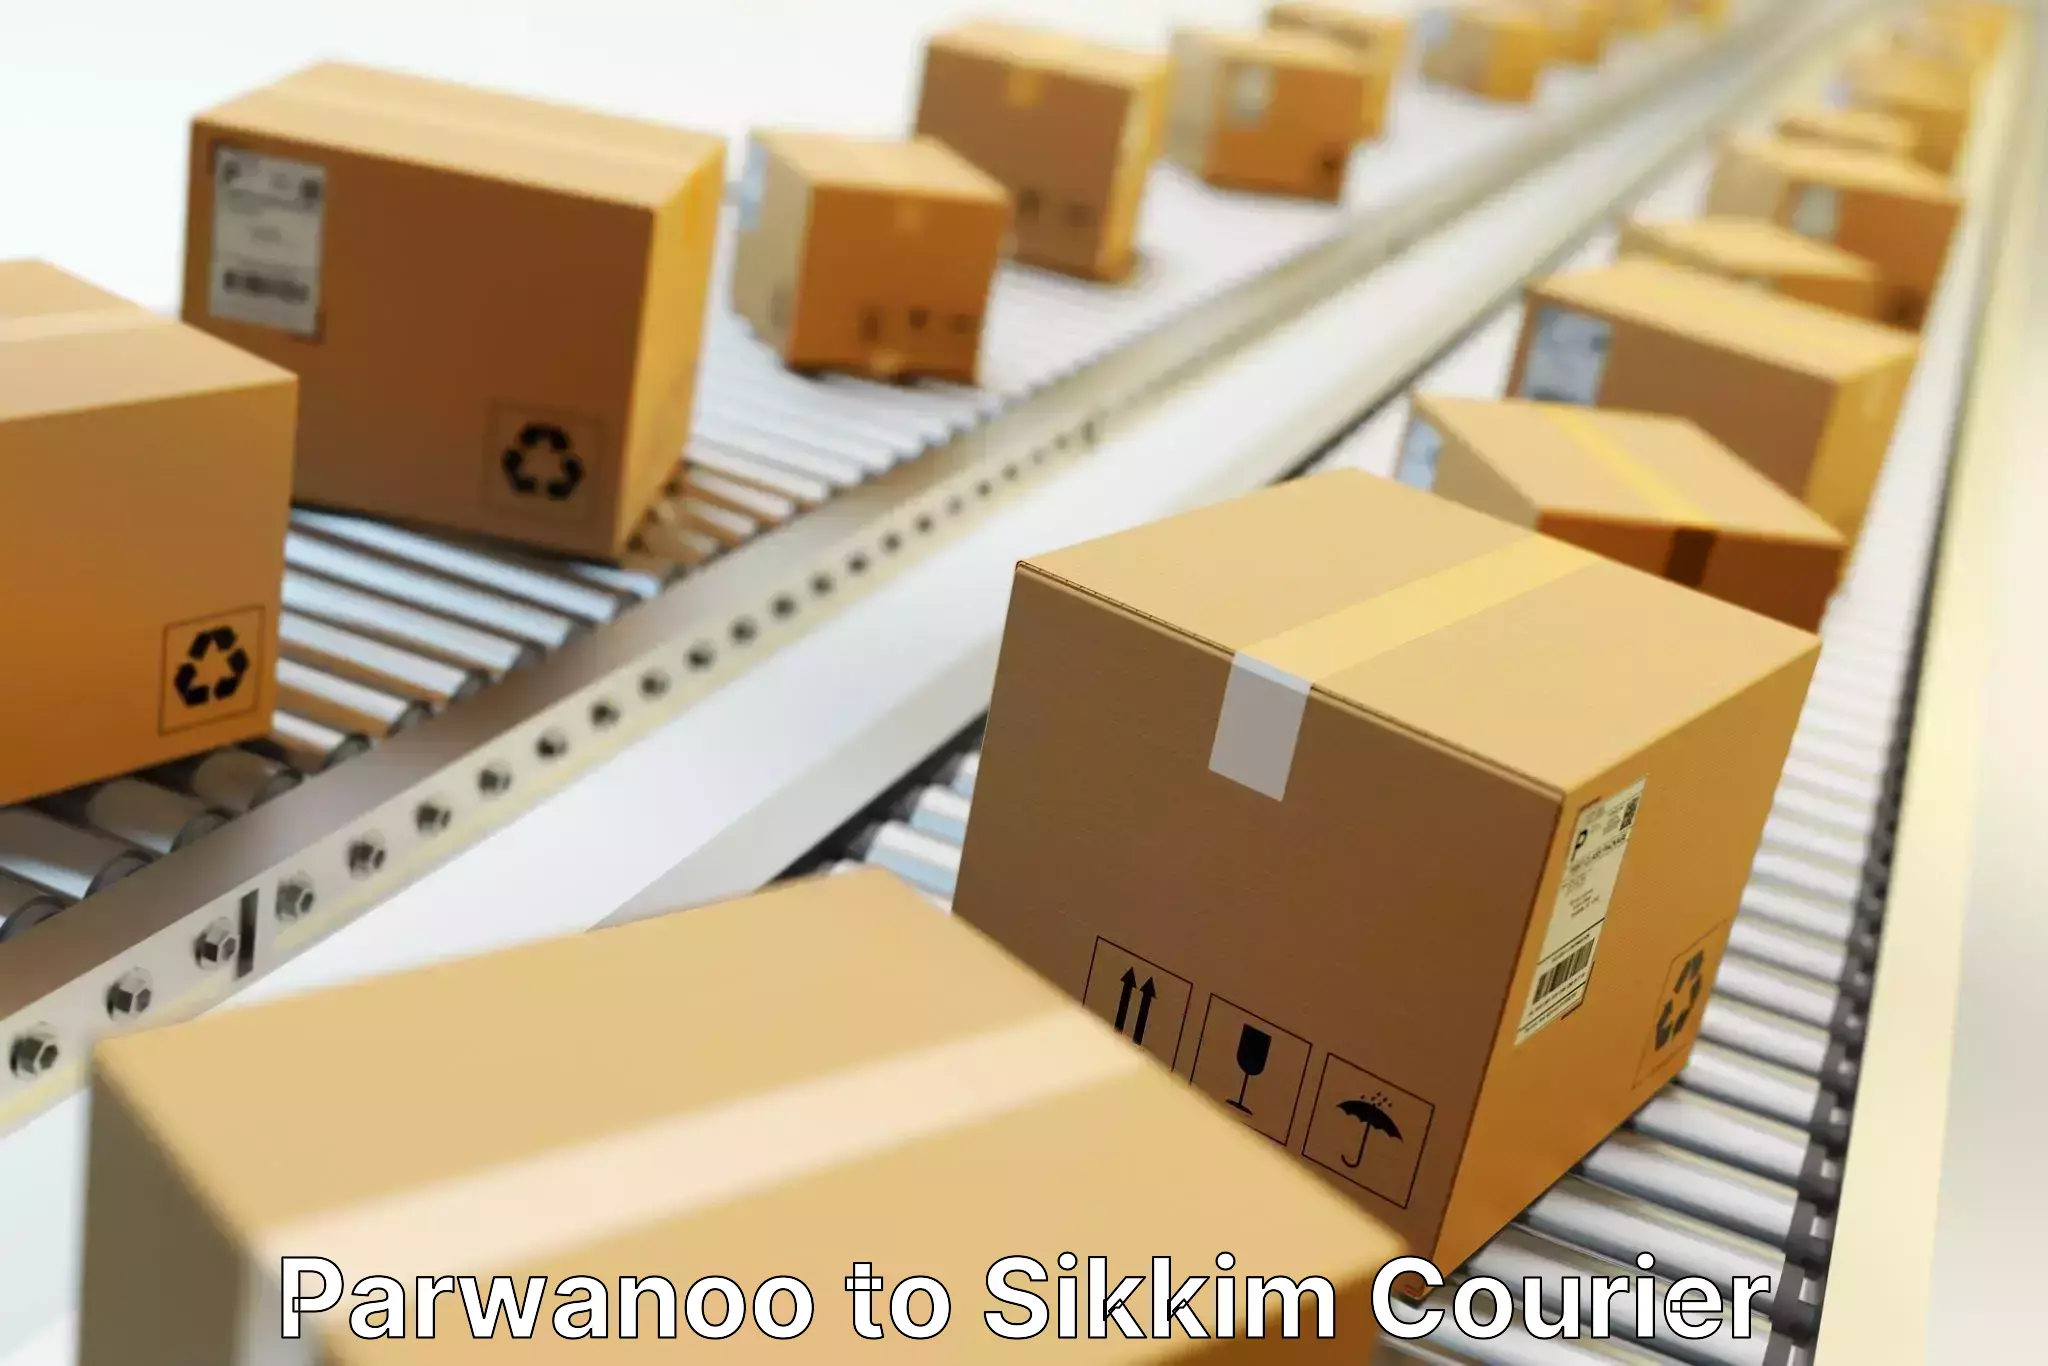 State-of-the-art courier technology Parwanoo to East Sikkim